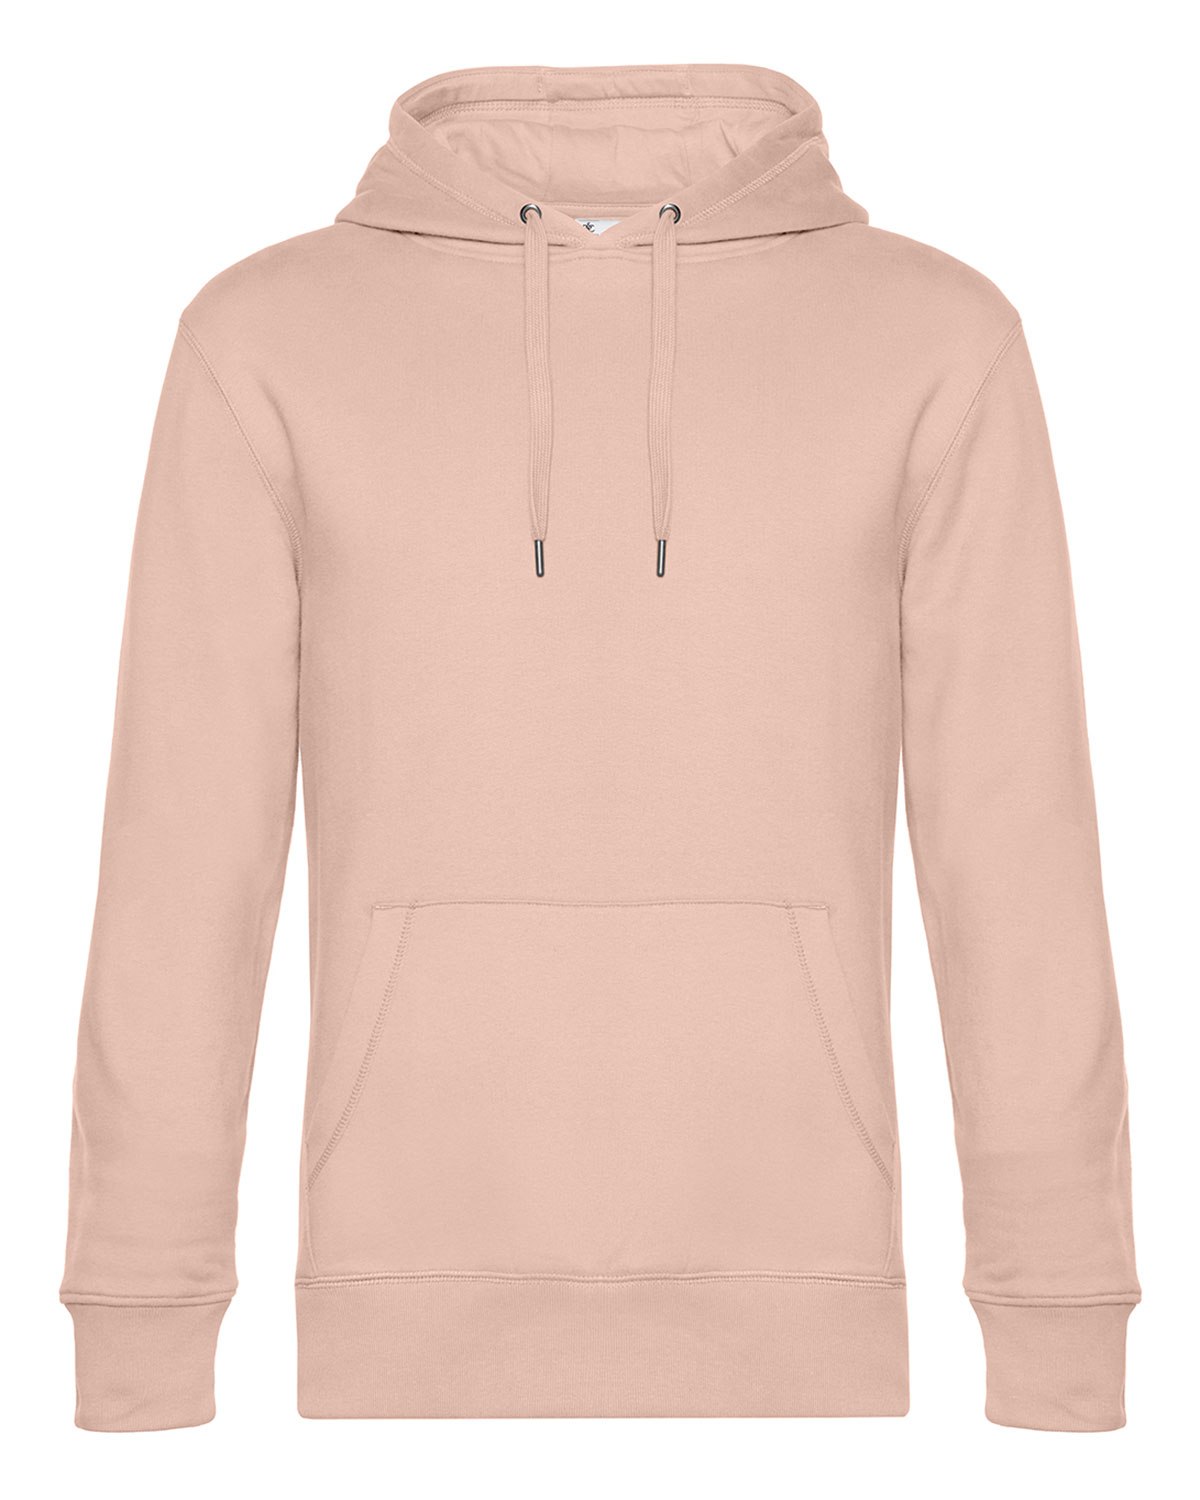 KING Hooded_° Soft Rose 3XL